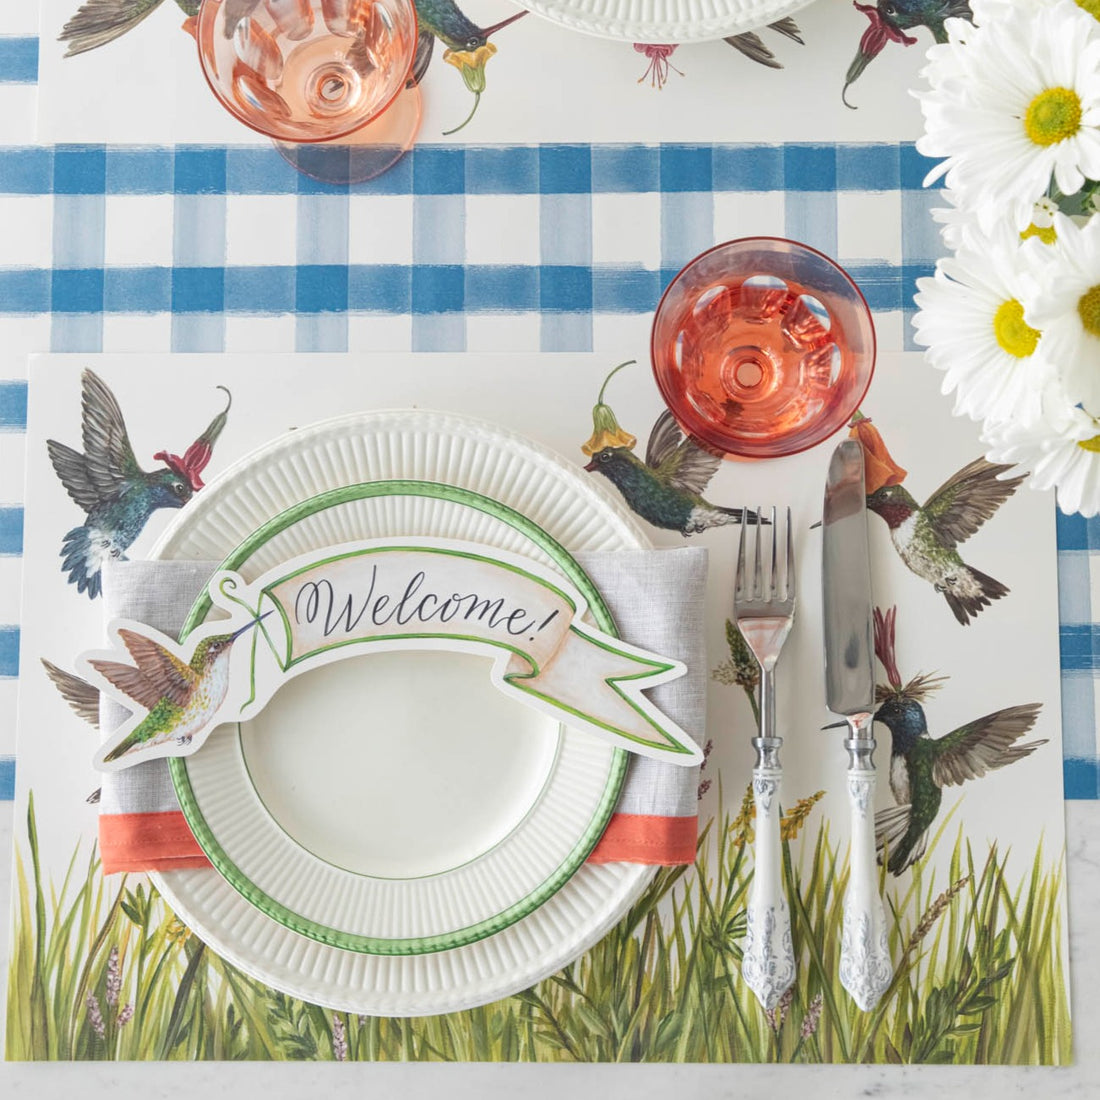 The Hummingbirds Placemat under a fresh spring-themed table setting, from above.